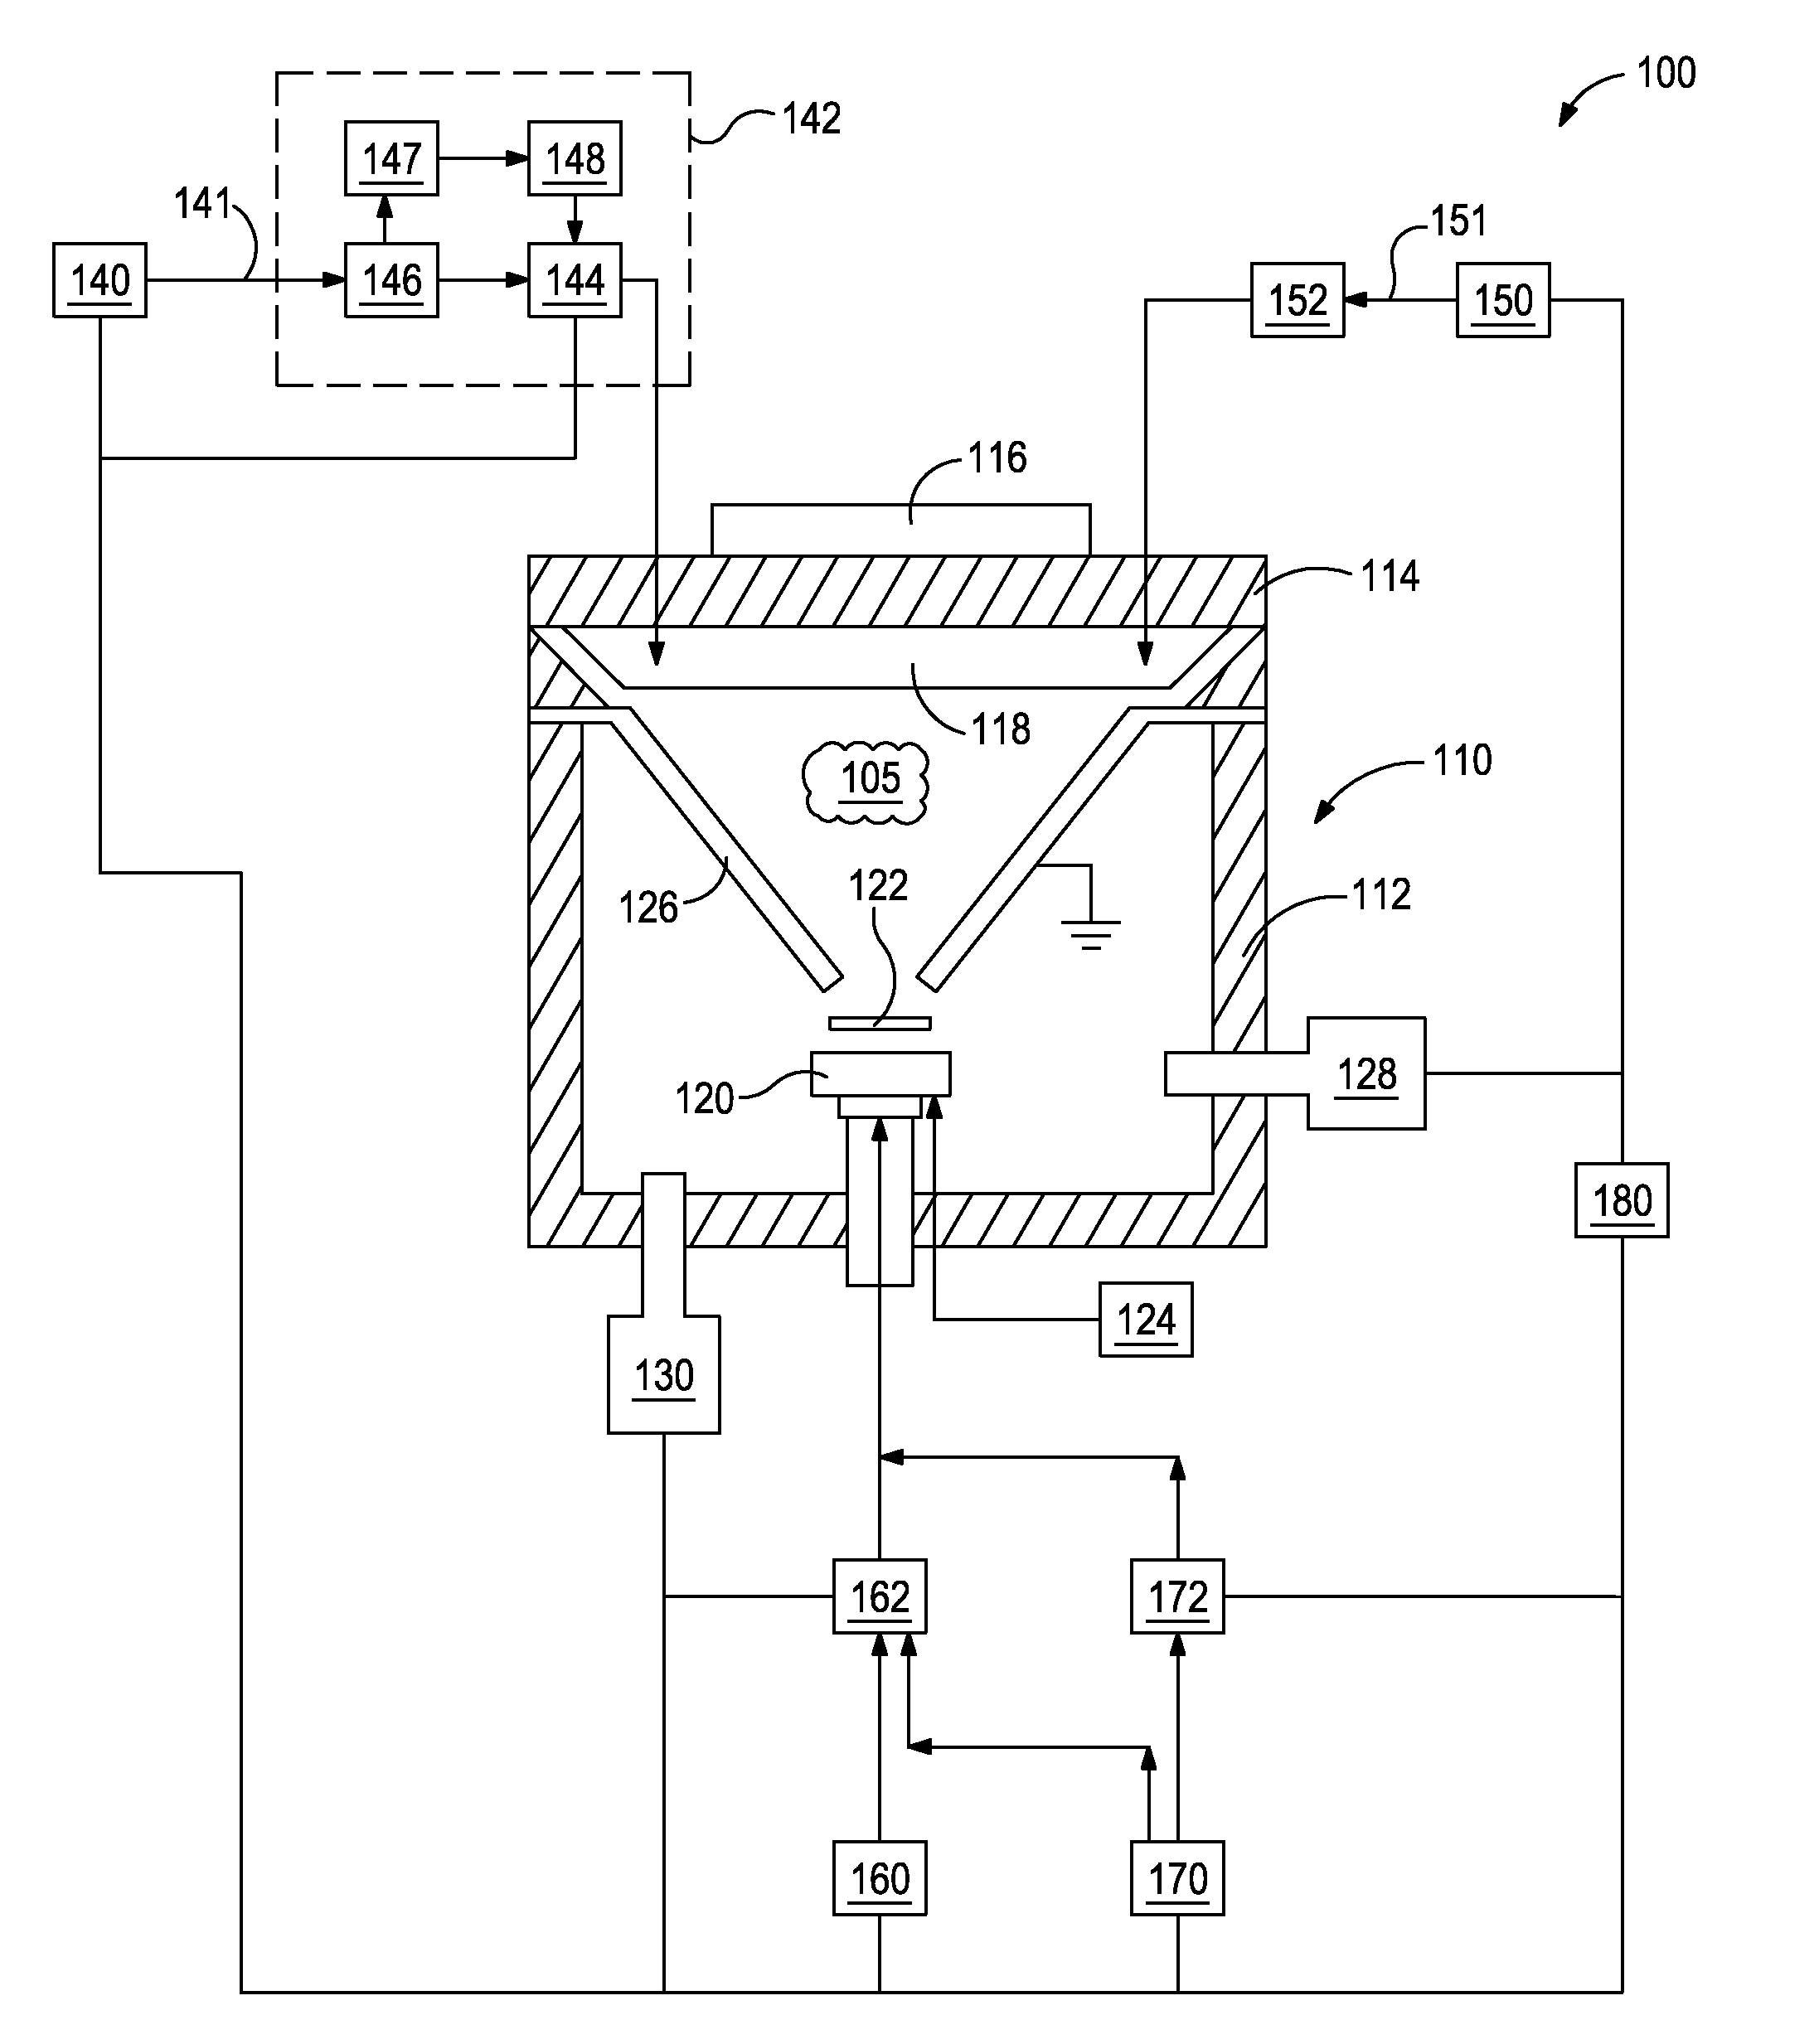 Pulse mode capability for operation of an RF/VHF impedance matching network with 4 quadrant, V.sub.RMS/I.sub.RMS responding detector circuitry